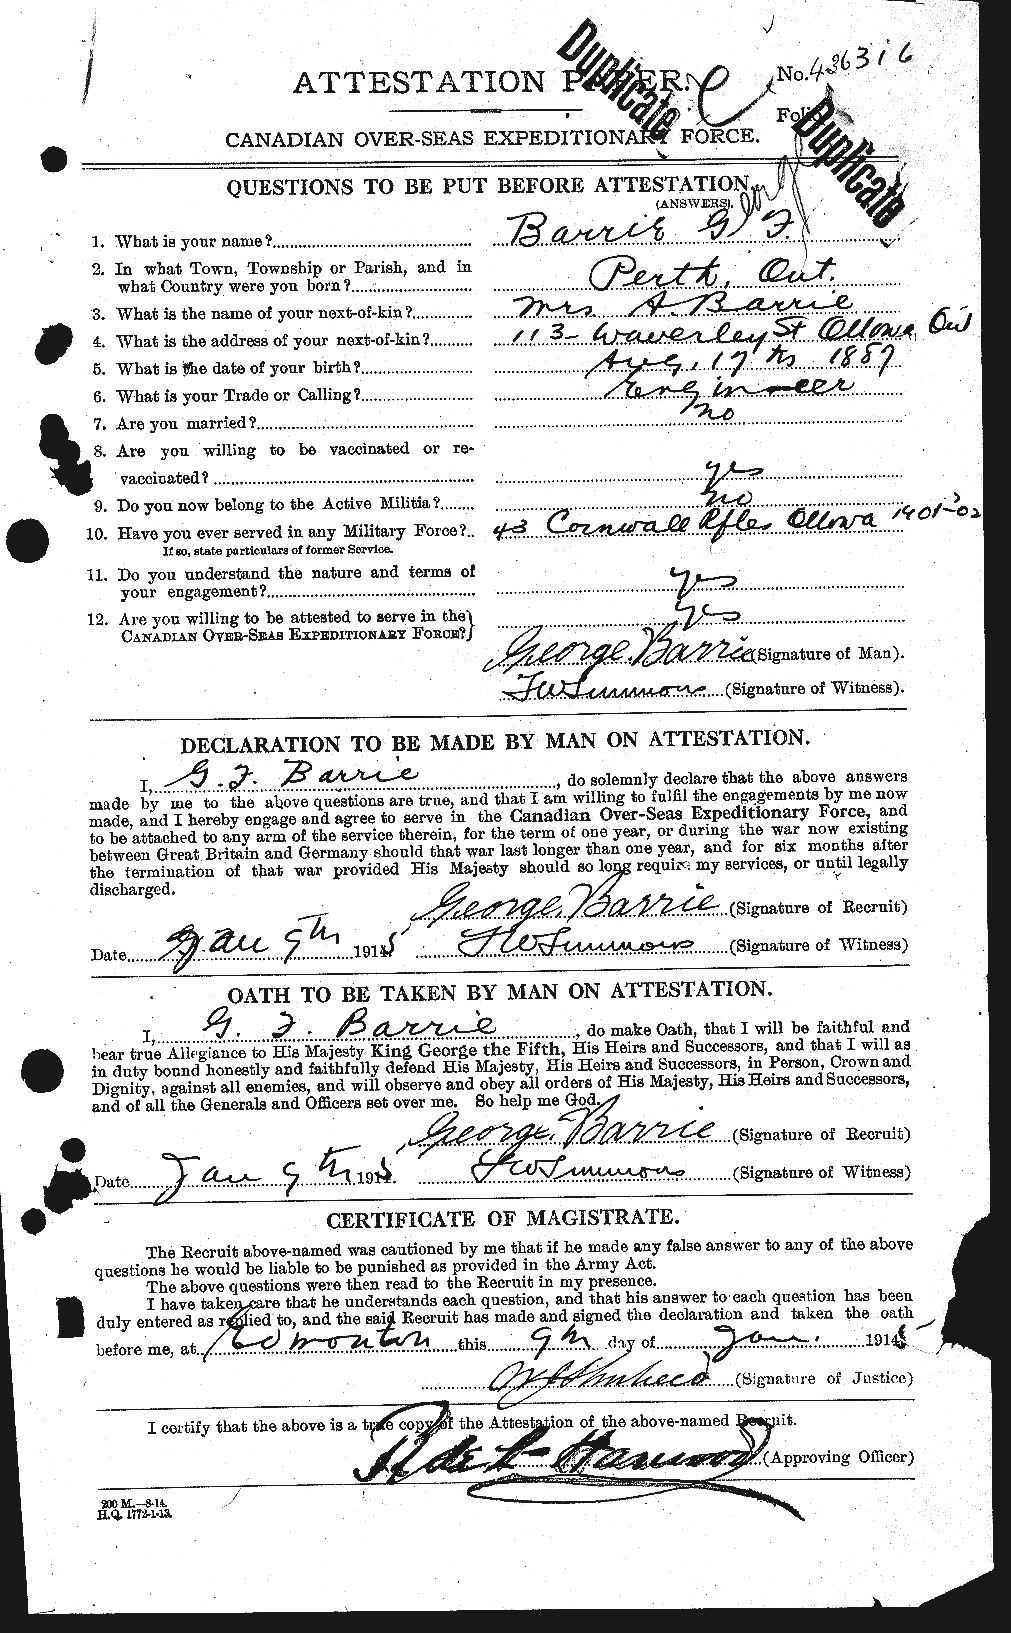 Personnel Records of the First World War - CEF 220047a